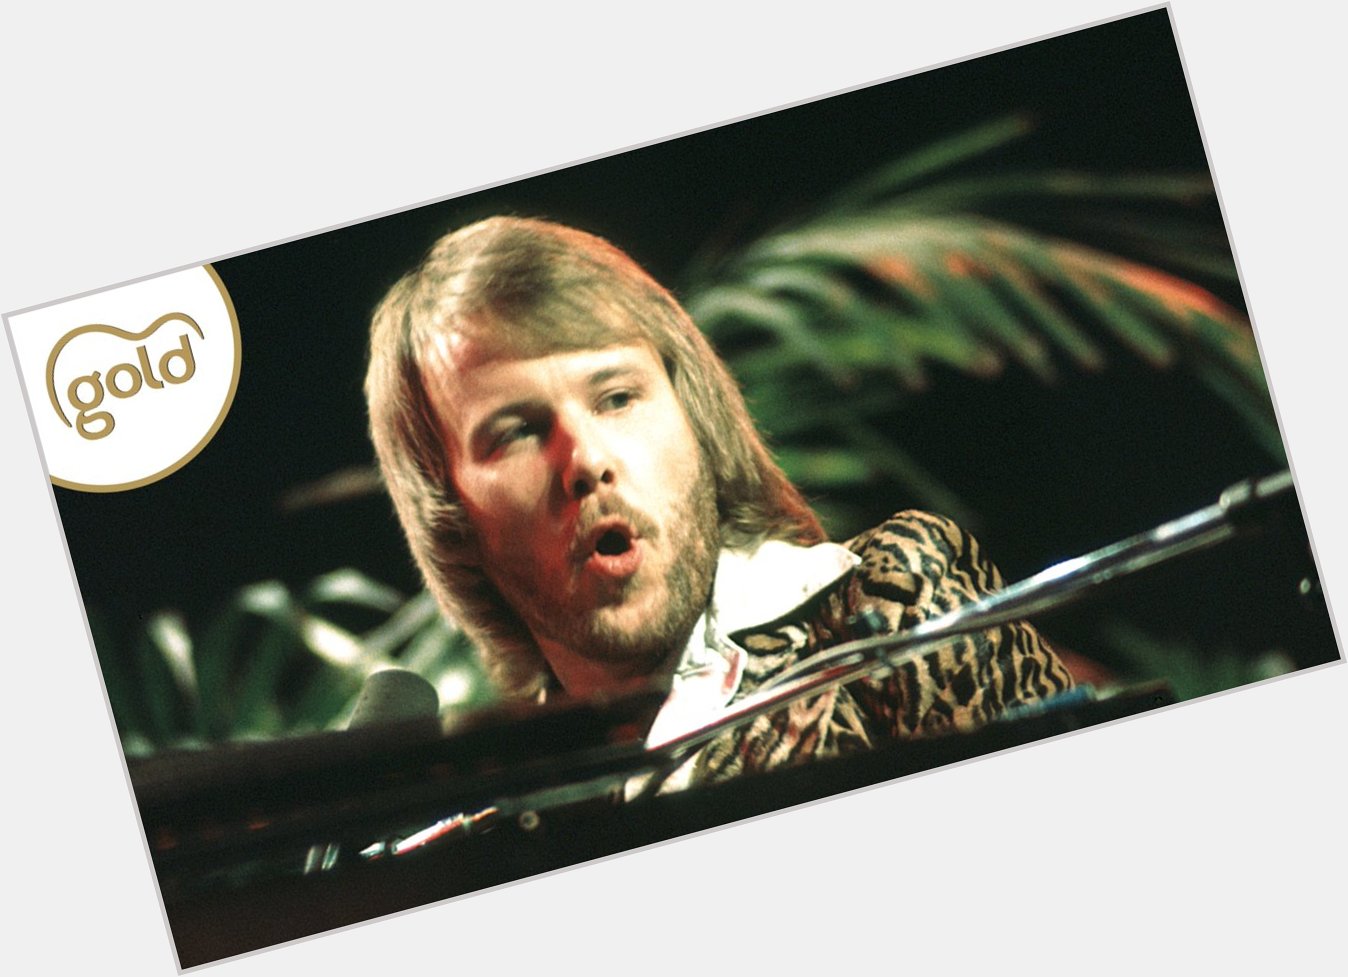 Happy birthday Benny Andersson! The ABBA legend turns 74 today. 